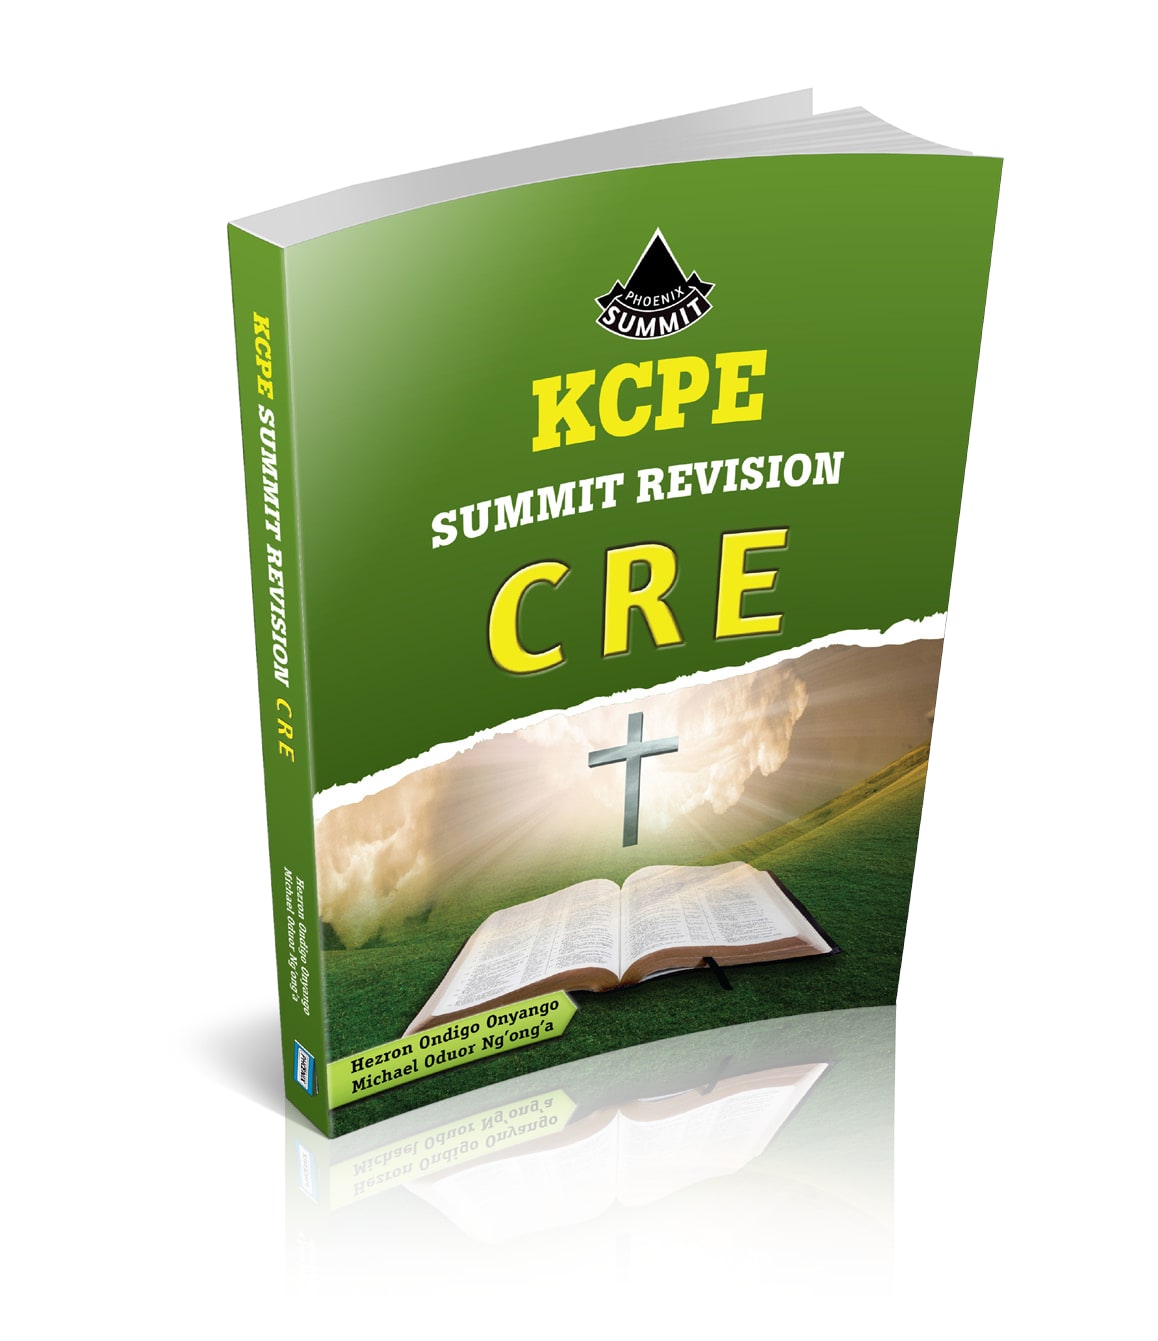 KCPE Summit Revision CRE